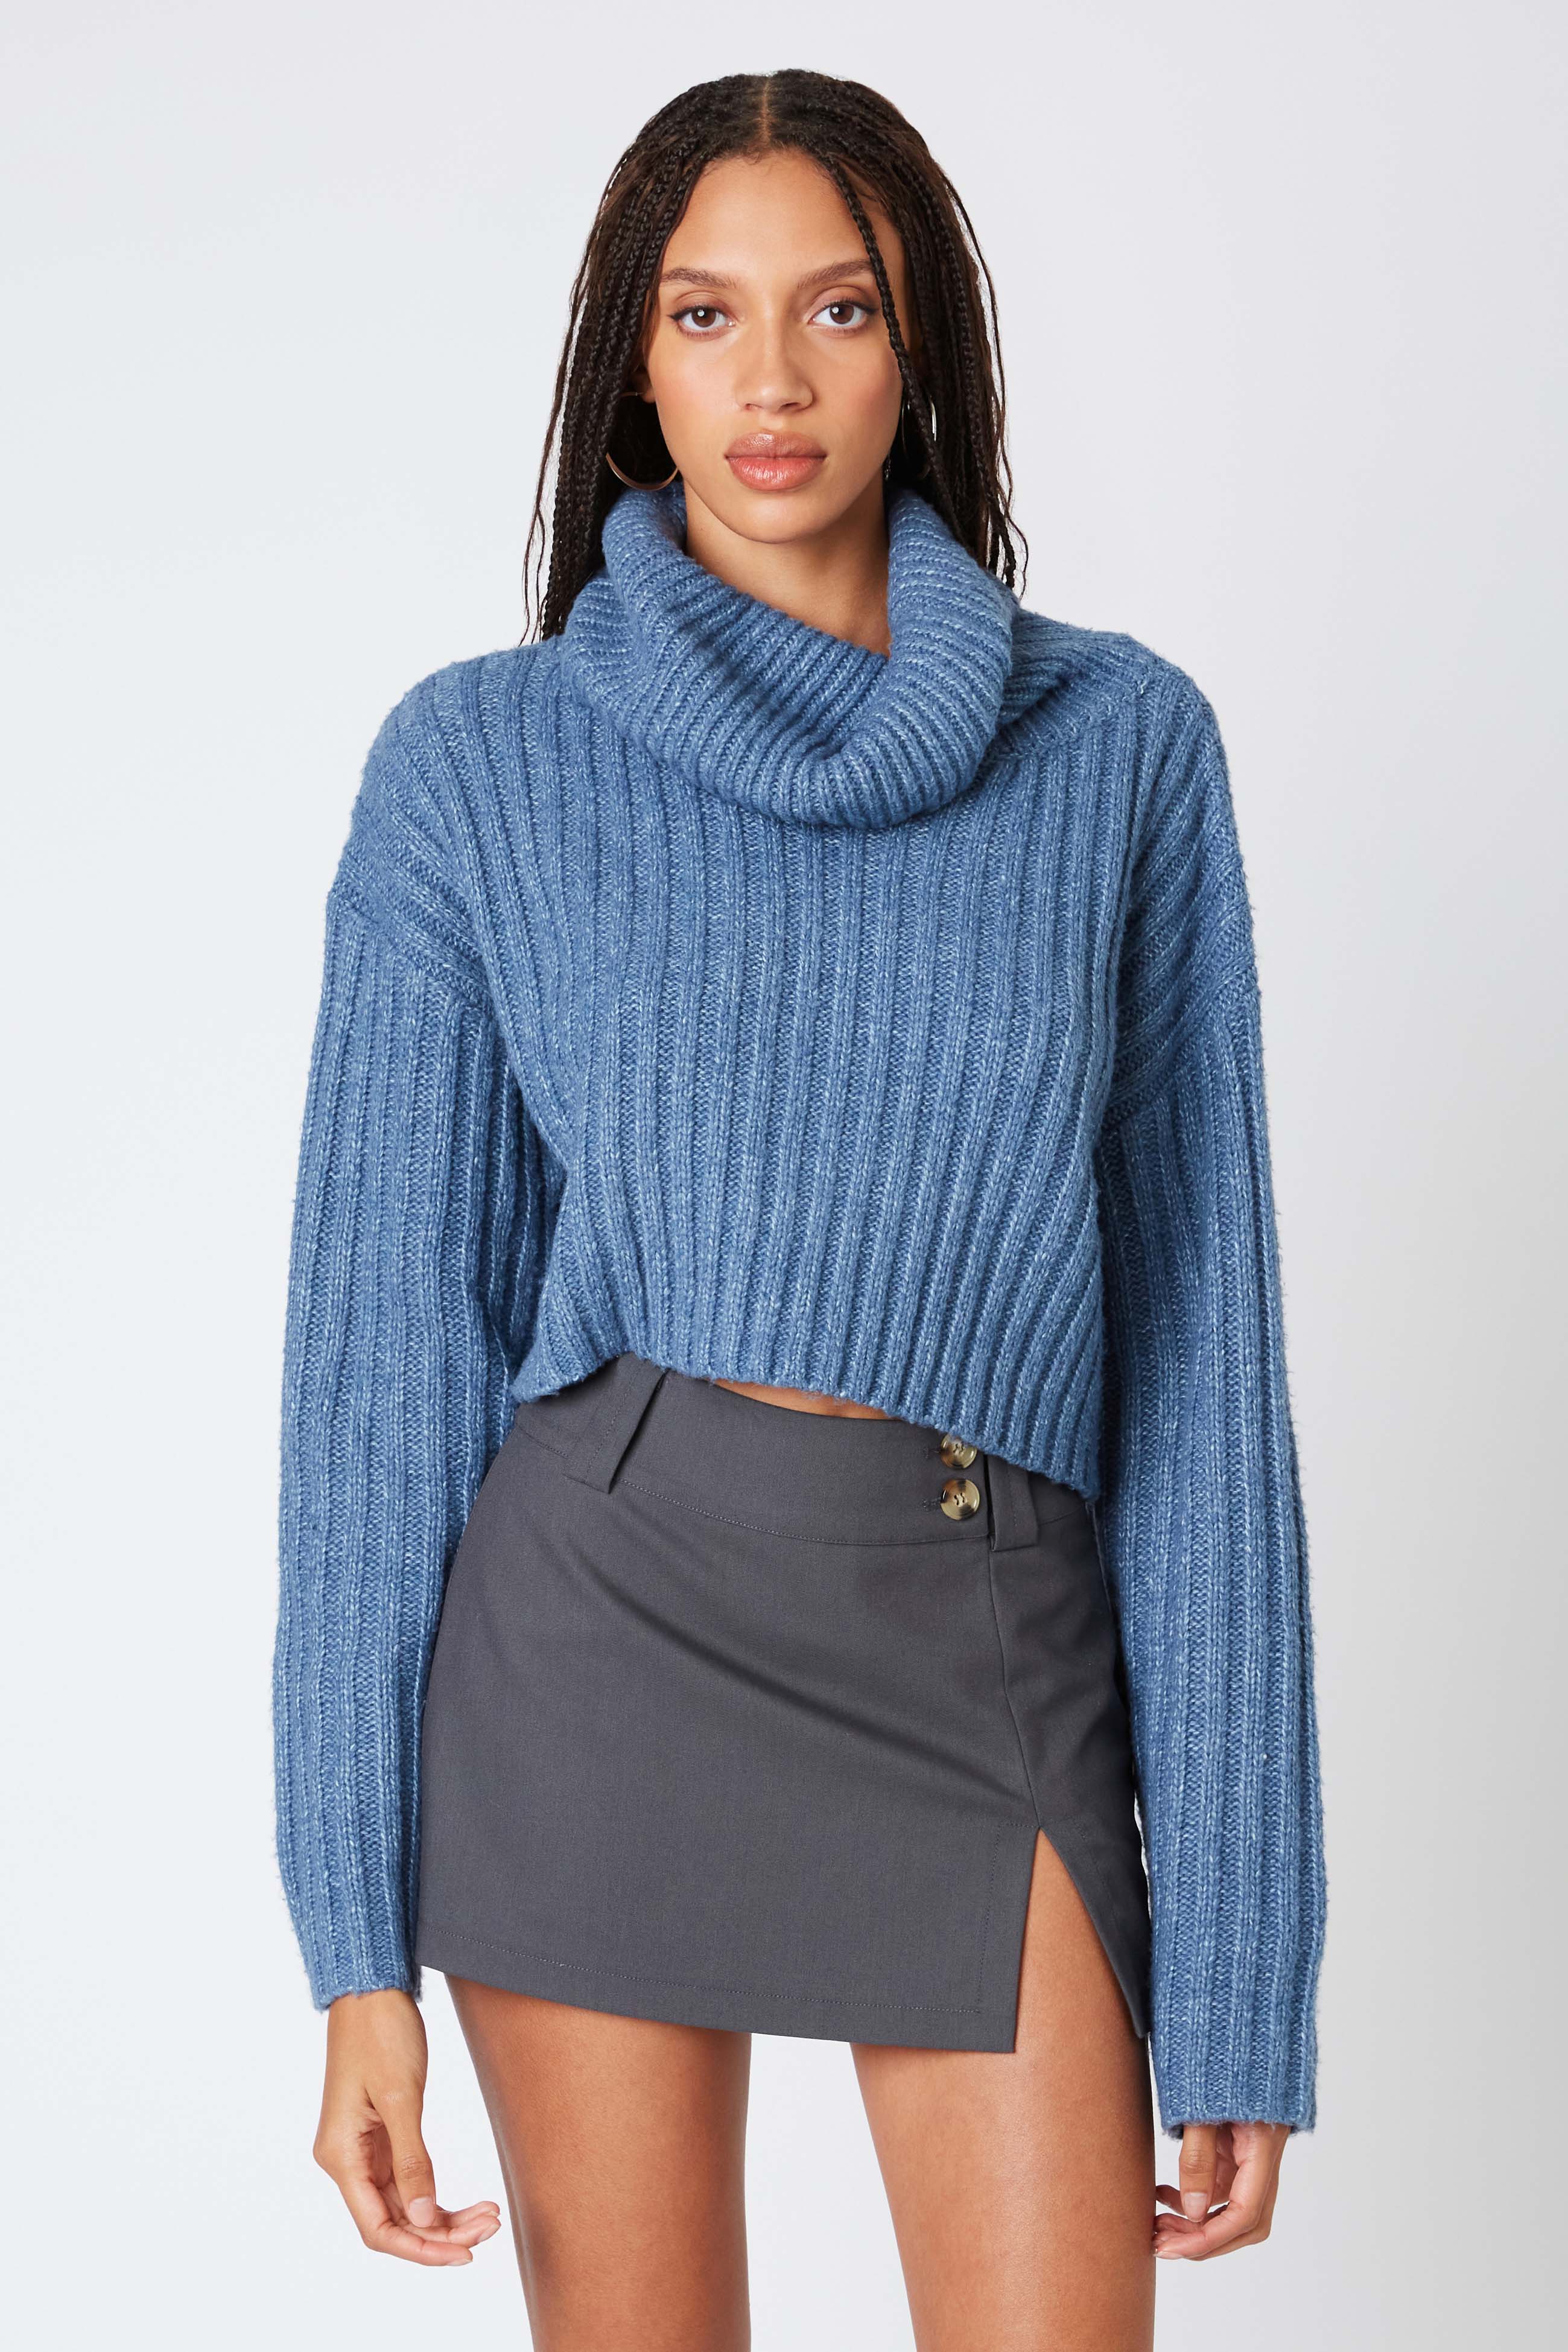 Cropped Turtleneck Sweater in Denim Front View